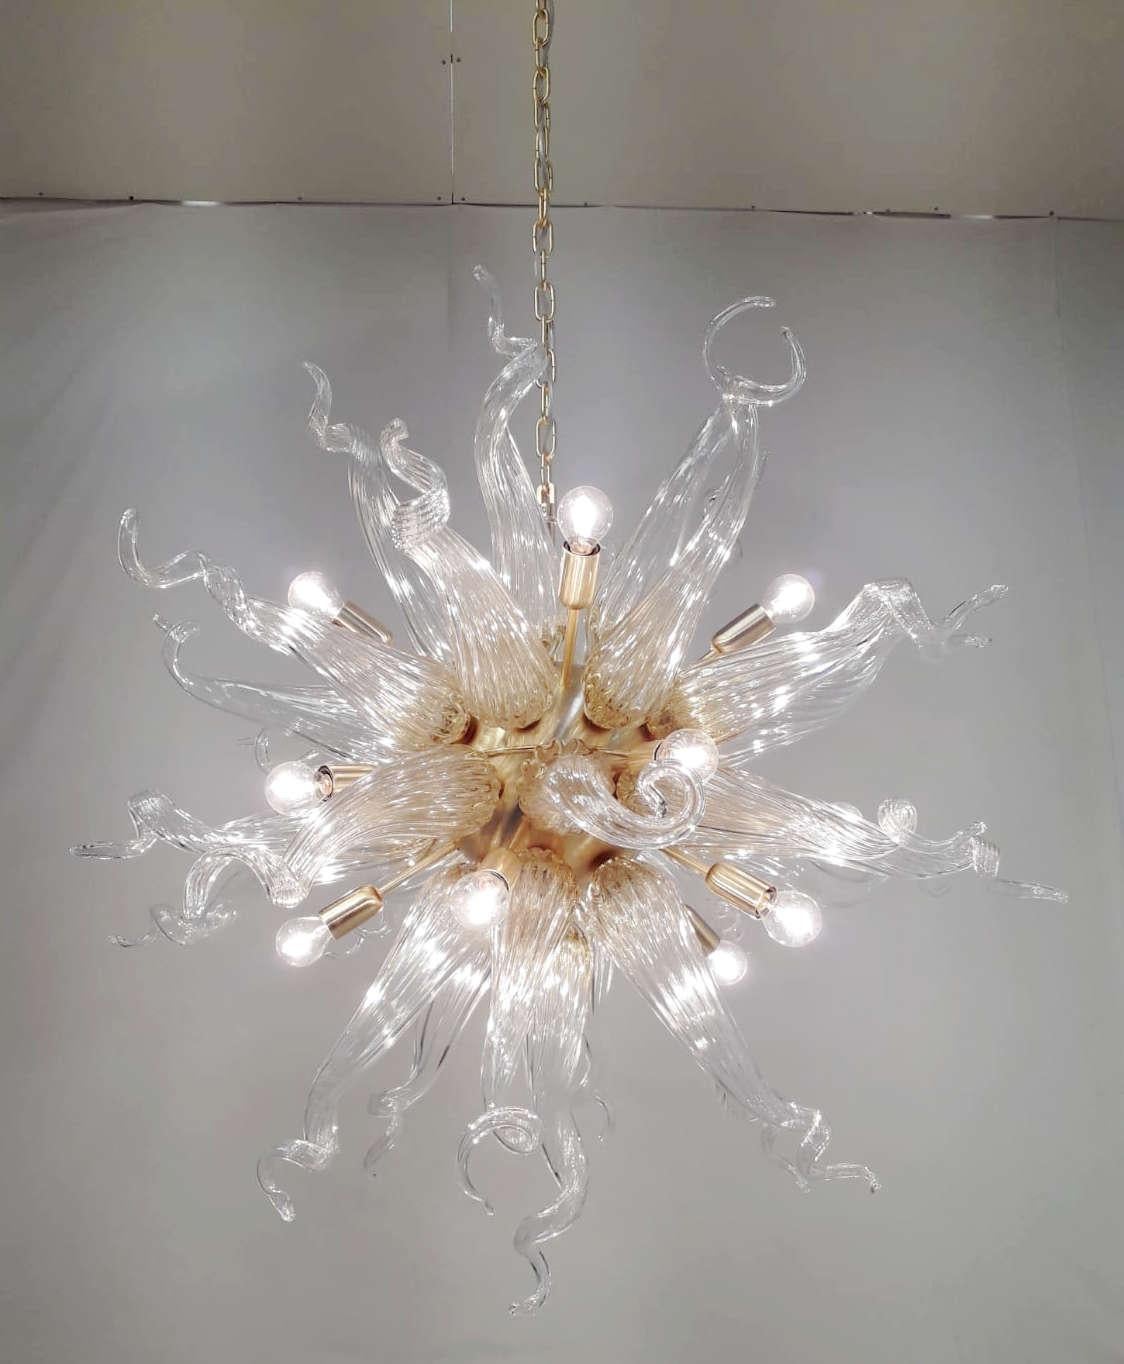 Italian sputnik chandelier shown in clear and amber murano glass with satin gold finish metal frame / designed by Fabio Bergomi for Fabio Ltd / Made in Italy
15 lights / E12 or E14 type / Max 40W each
Measures: Height 33.5 inches plus chain and